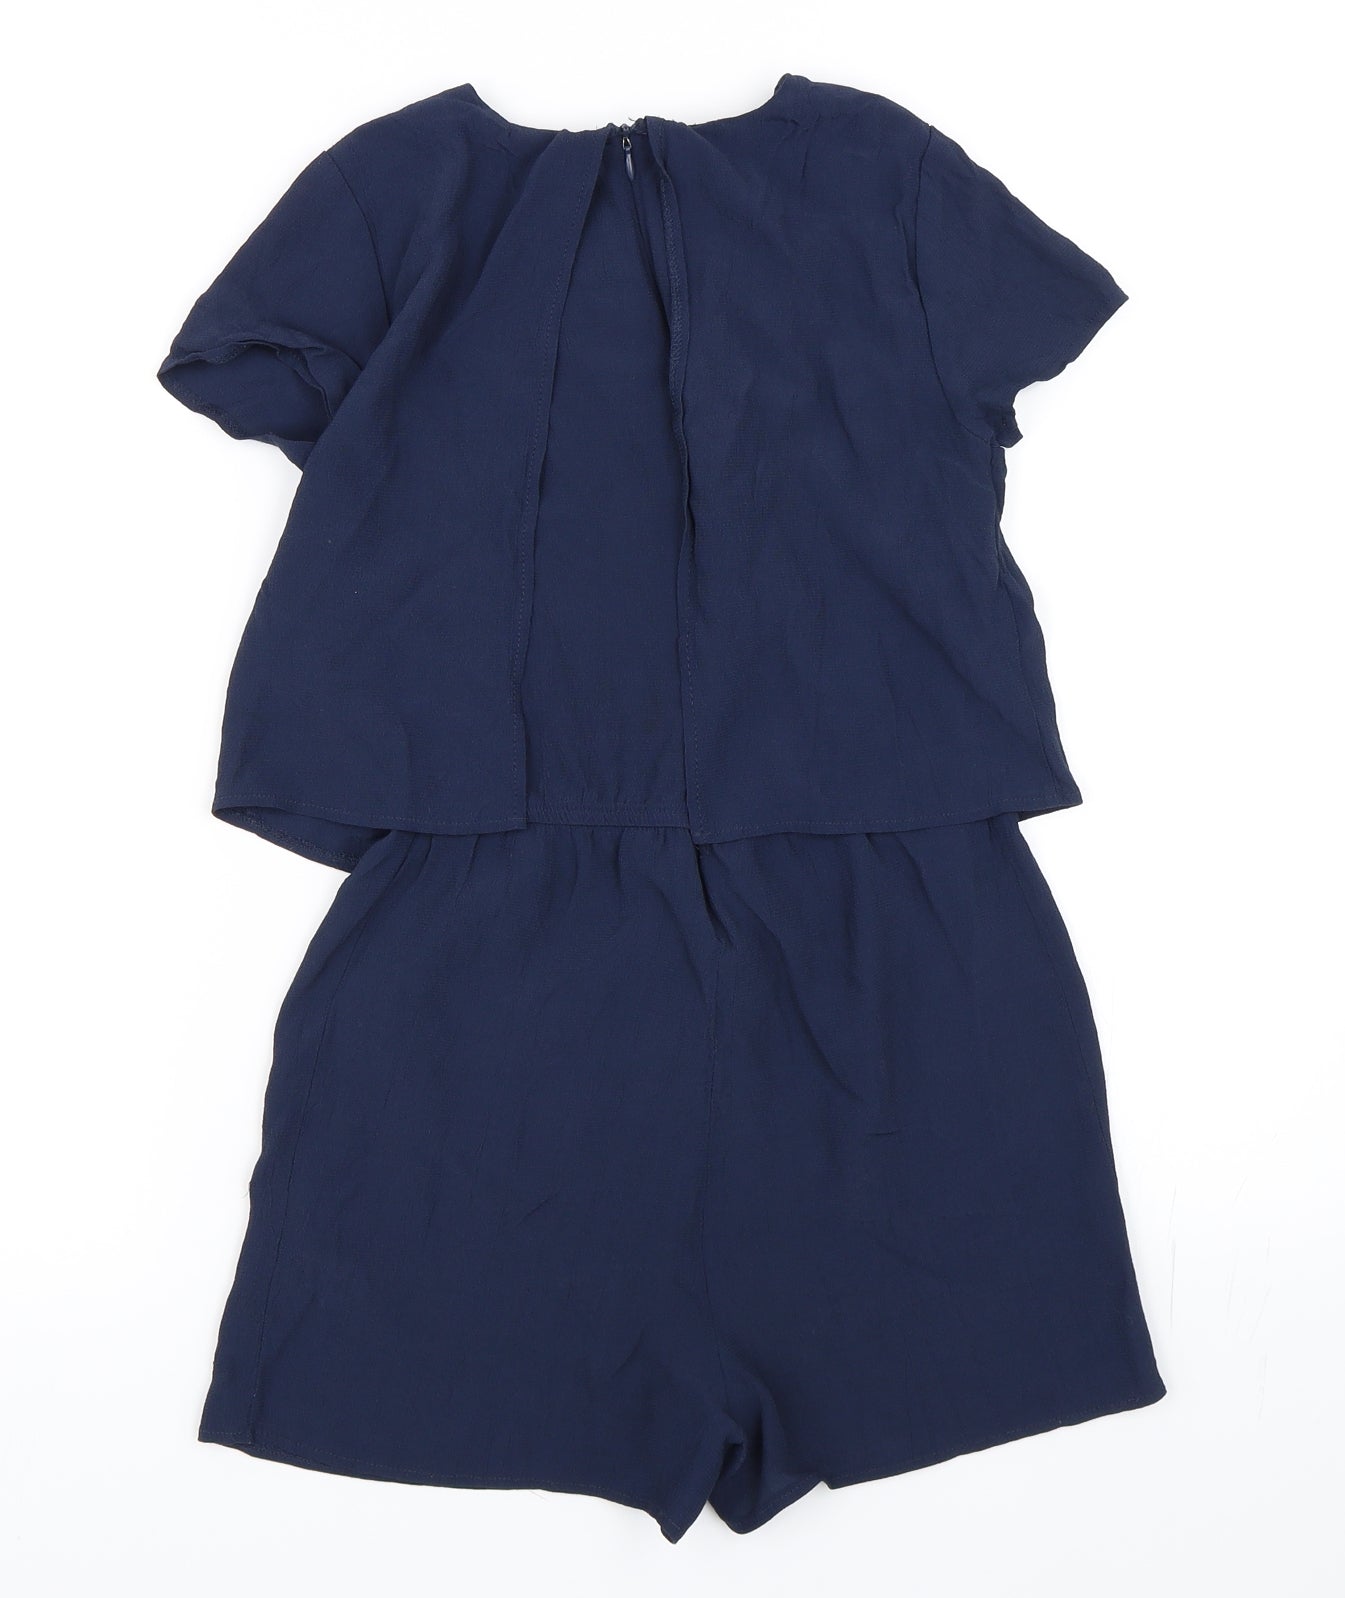 F&F Girls Blue   Playsuit One-Piece Size 10-11 Years